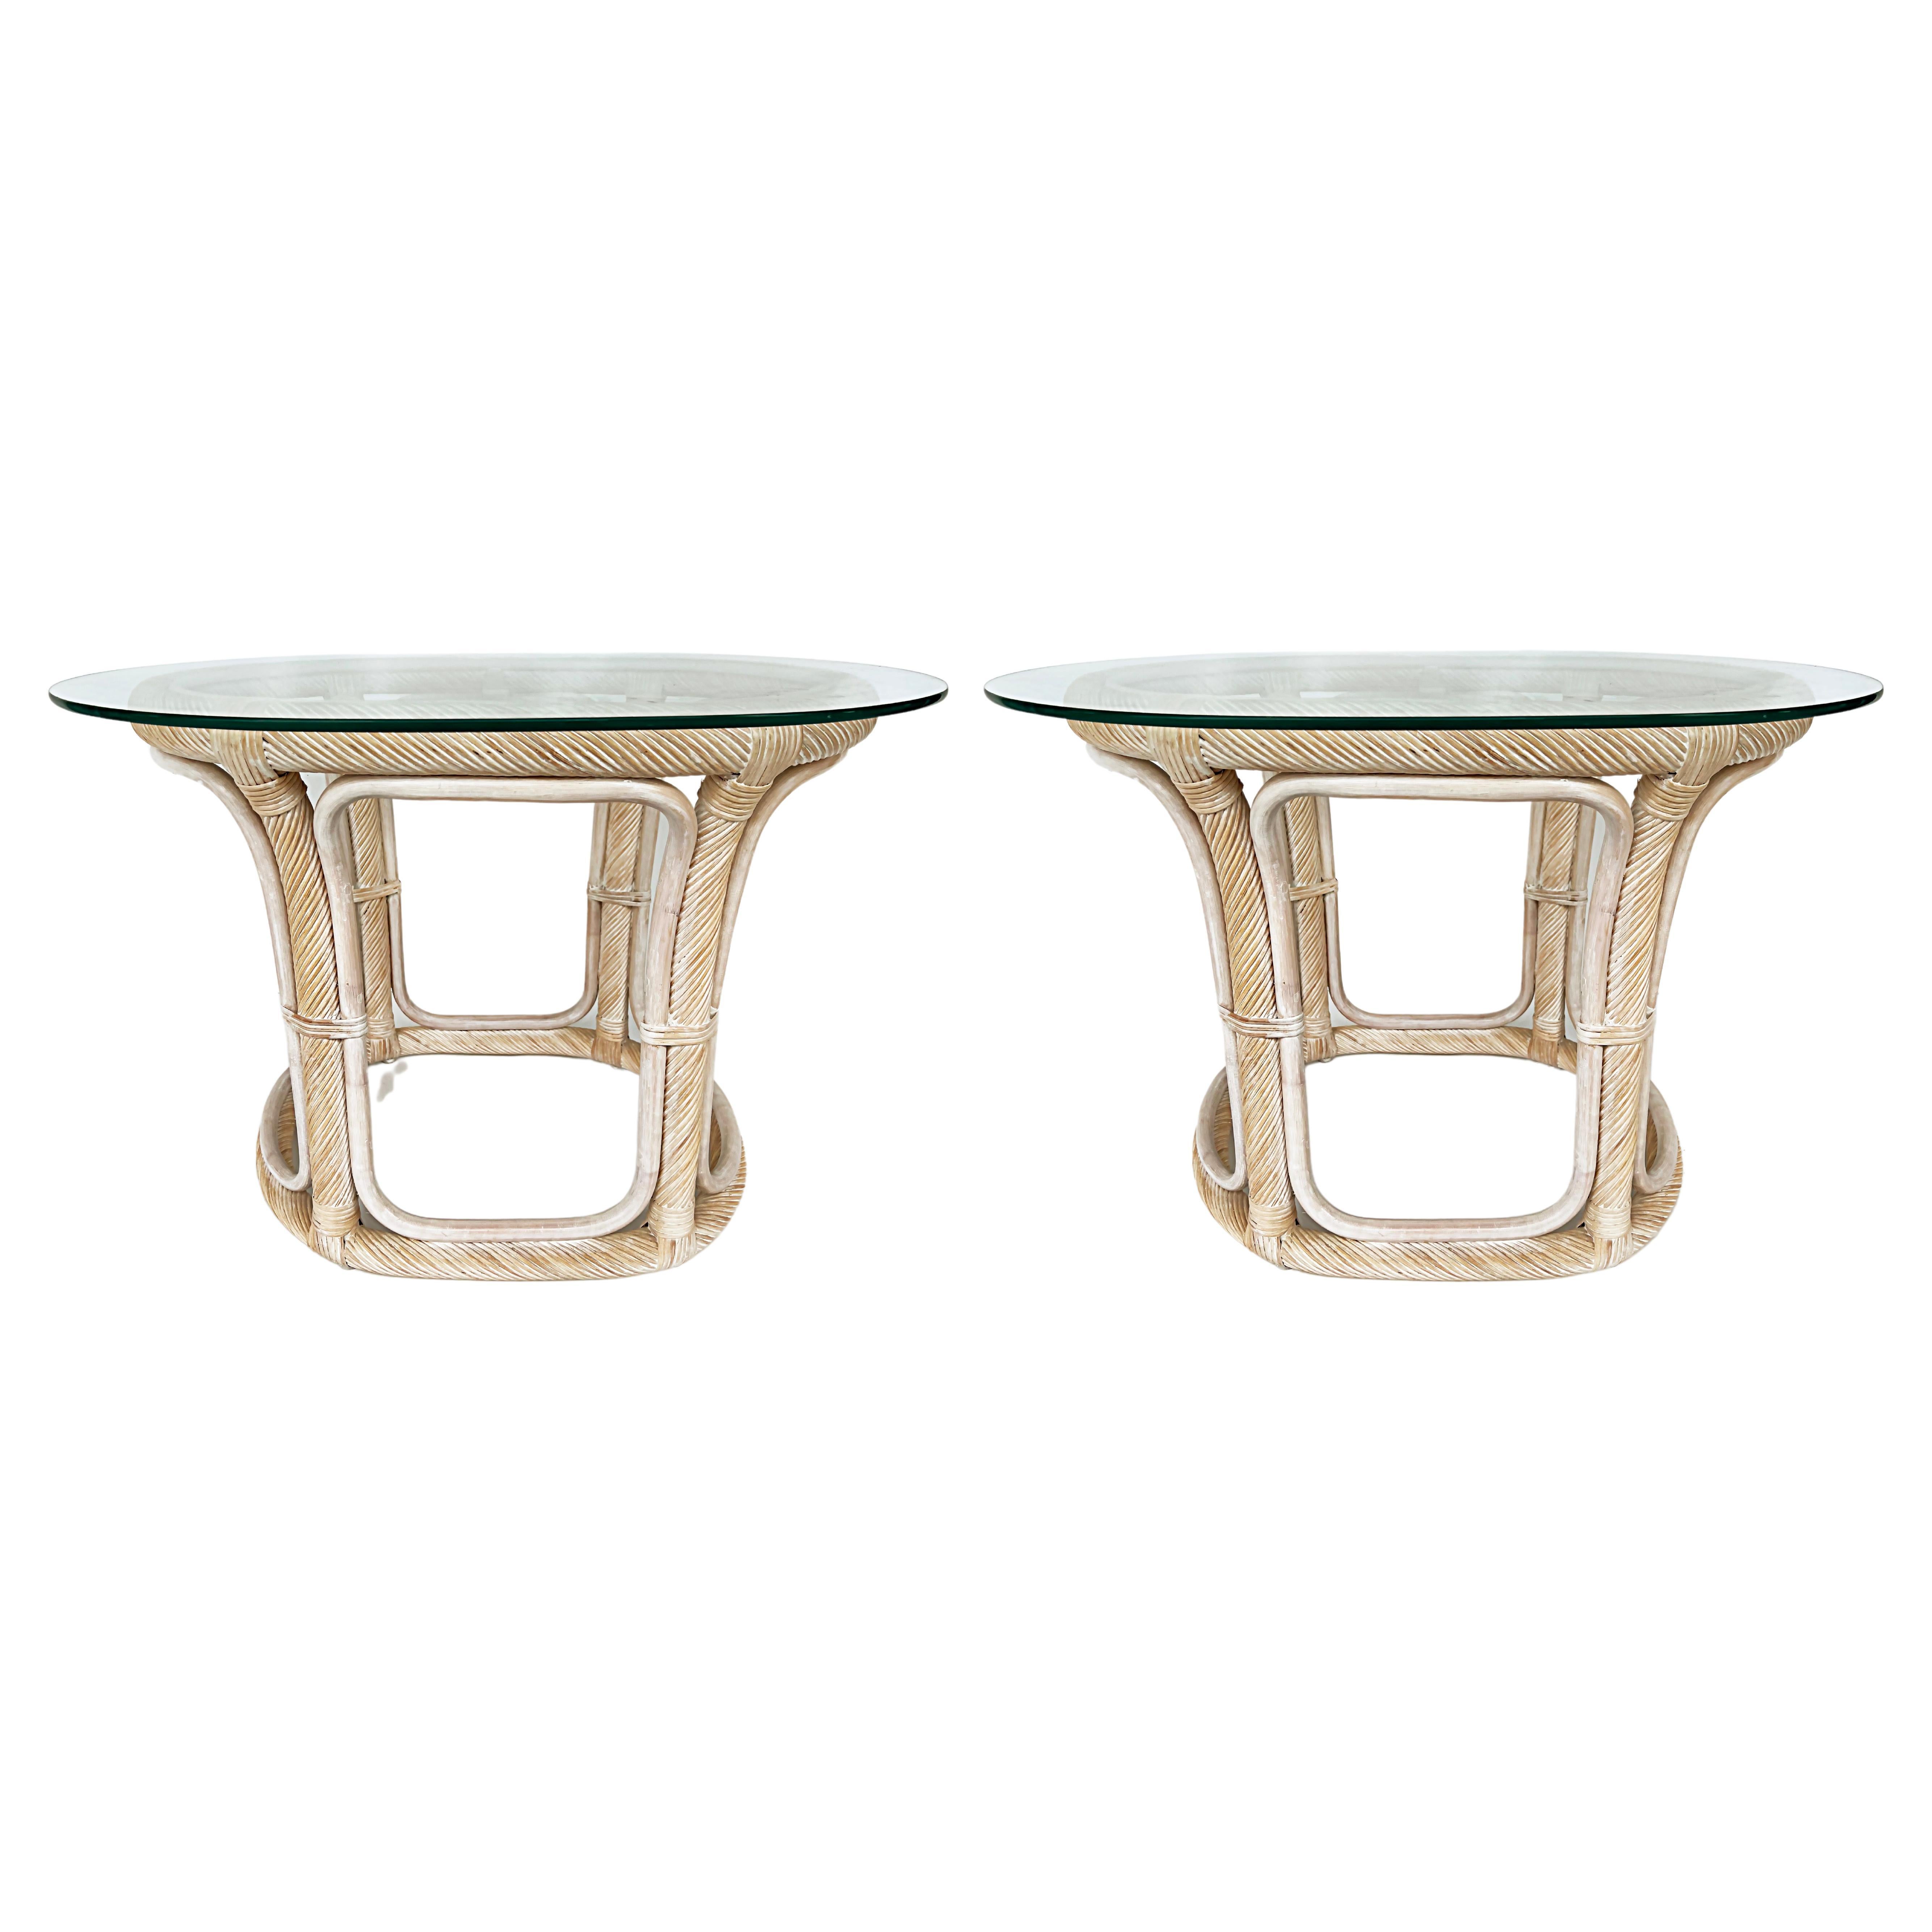 Vintage Coastal Washed Pencil Reed Glass Top End Tables, Pair For Sale